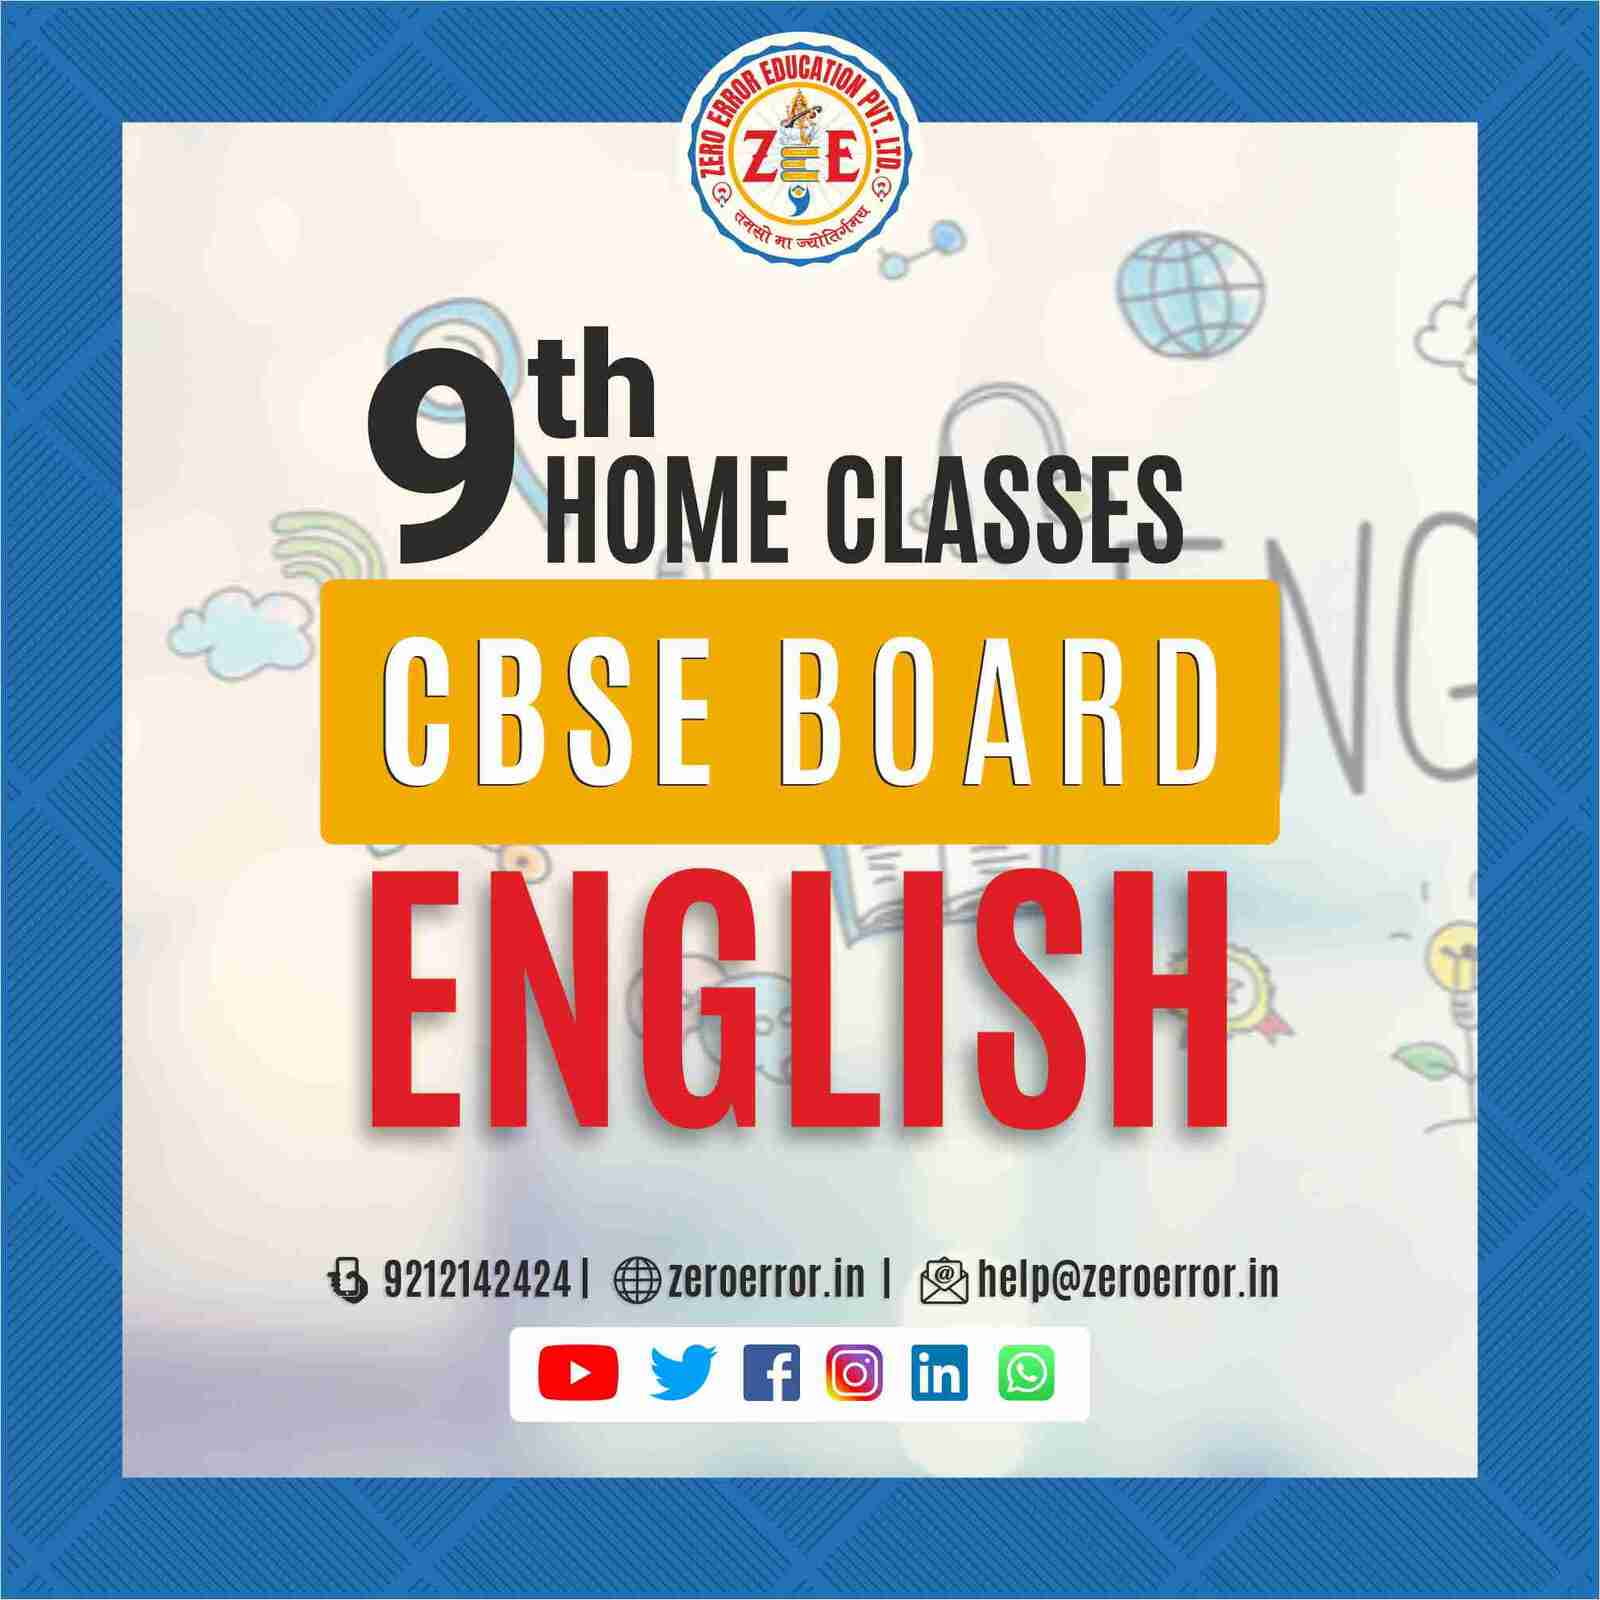 9th Grade CBSE English Online Classes by Zero Error Education Prepare for your CBSE board exams with online and offline English classes for 9th grade. Learn from experienced home tutors and get all the help you need to succeed. Enroll today at Zero Error Education. [https://zeroerror.in/] Call 9212142424 for more information.